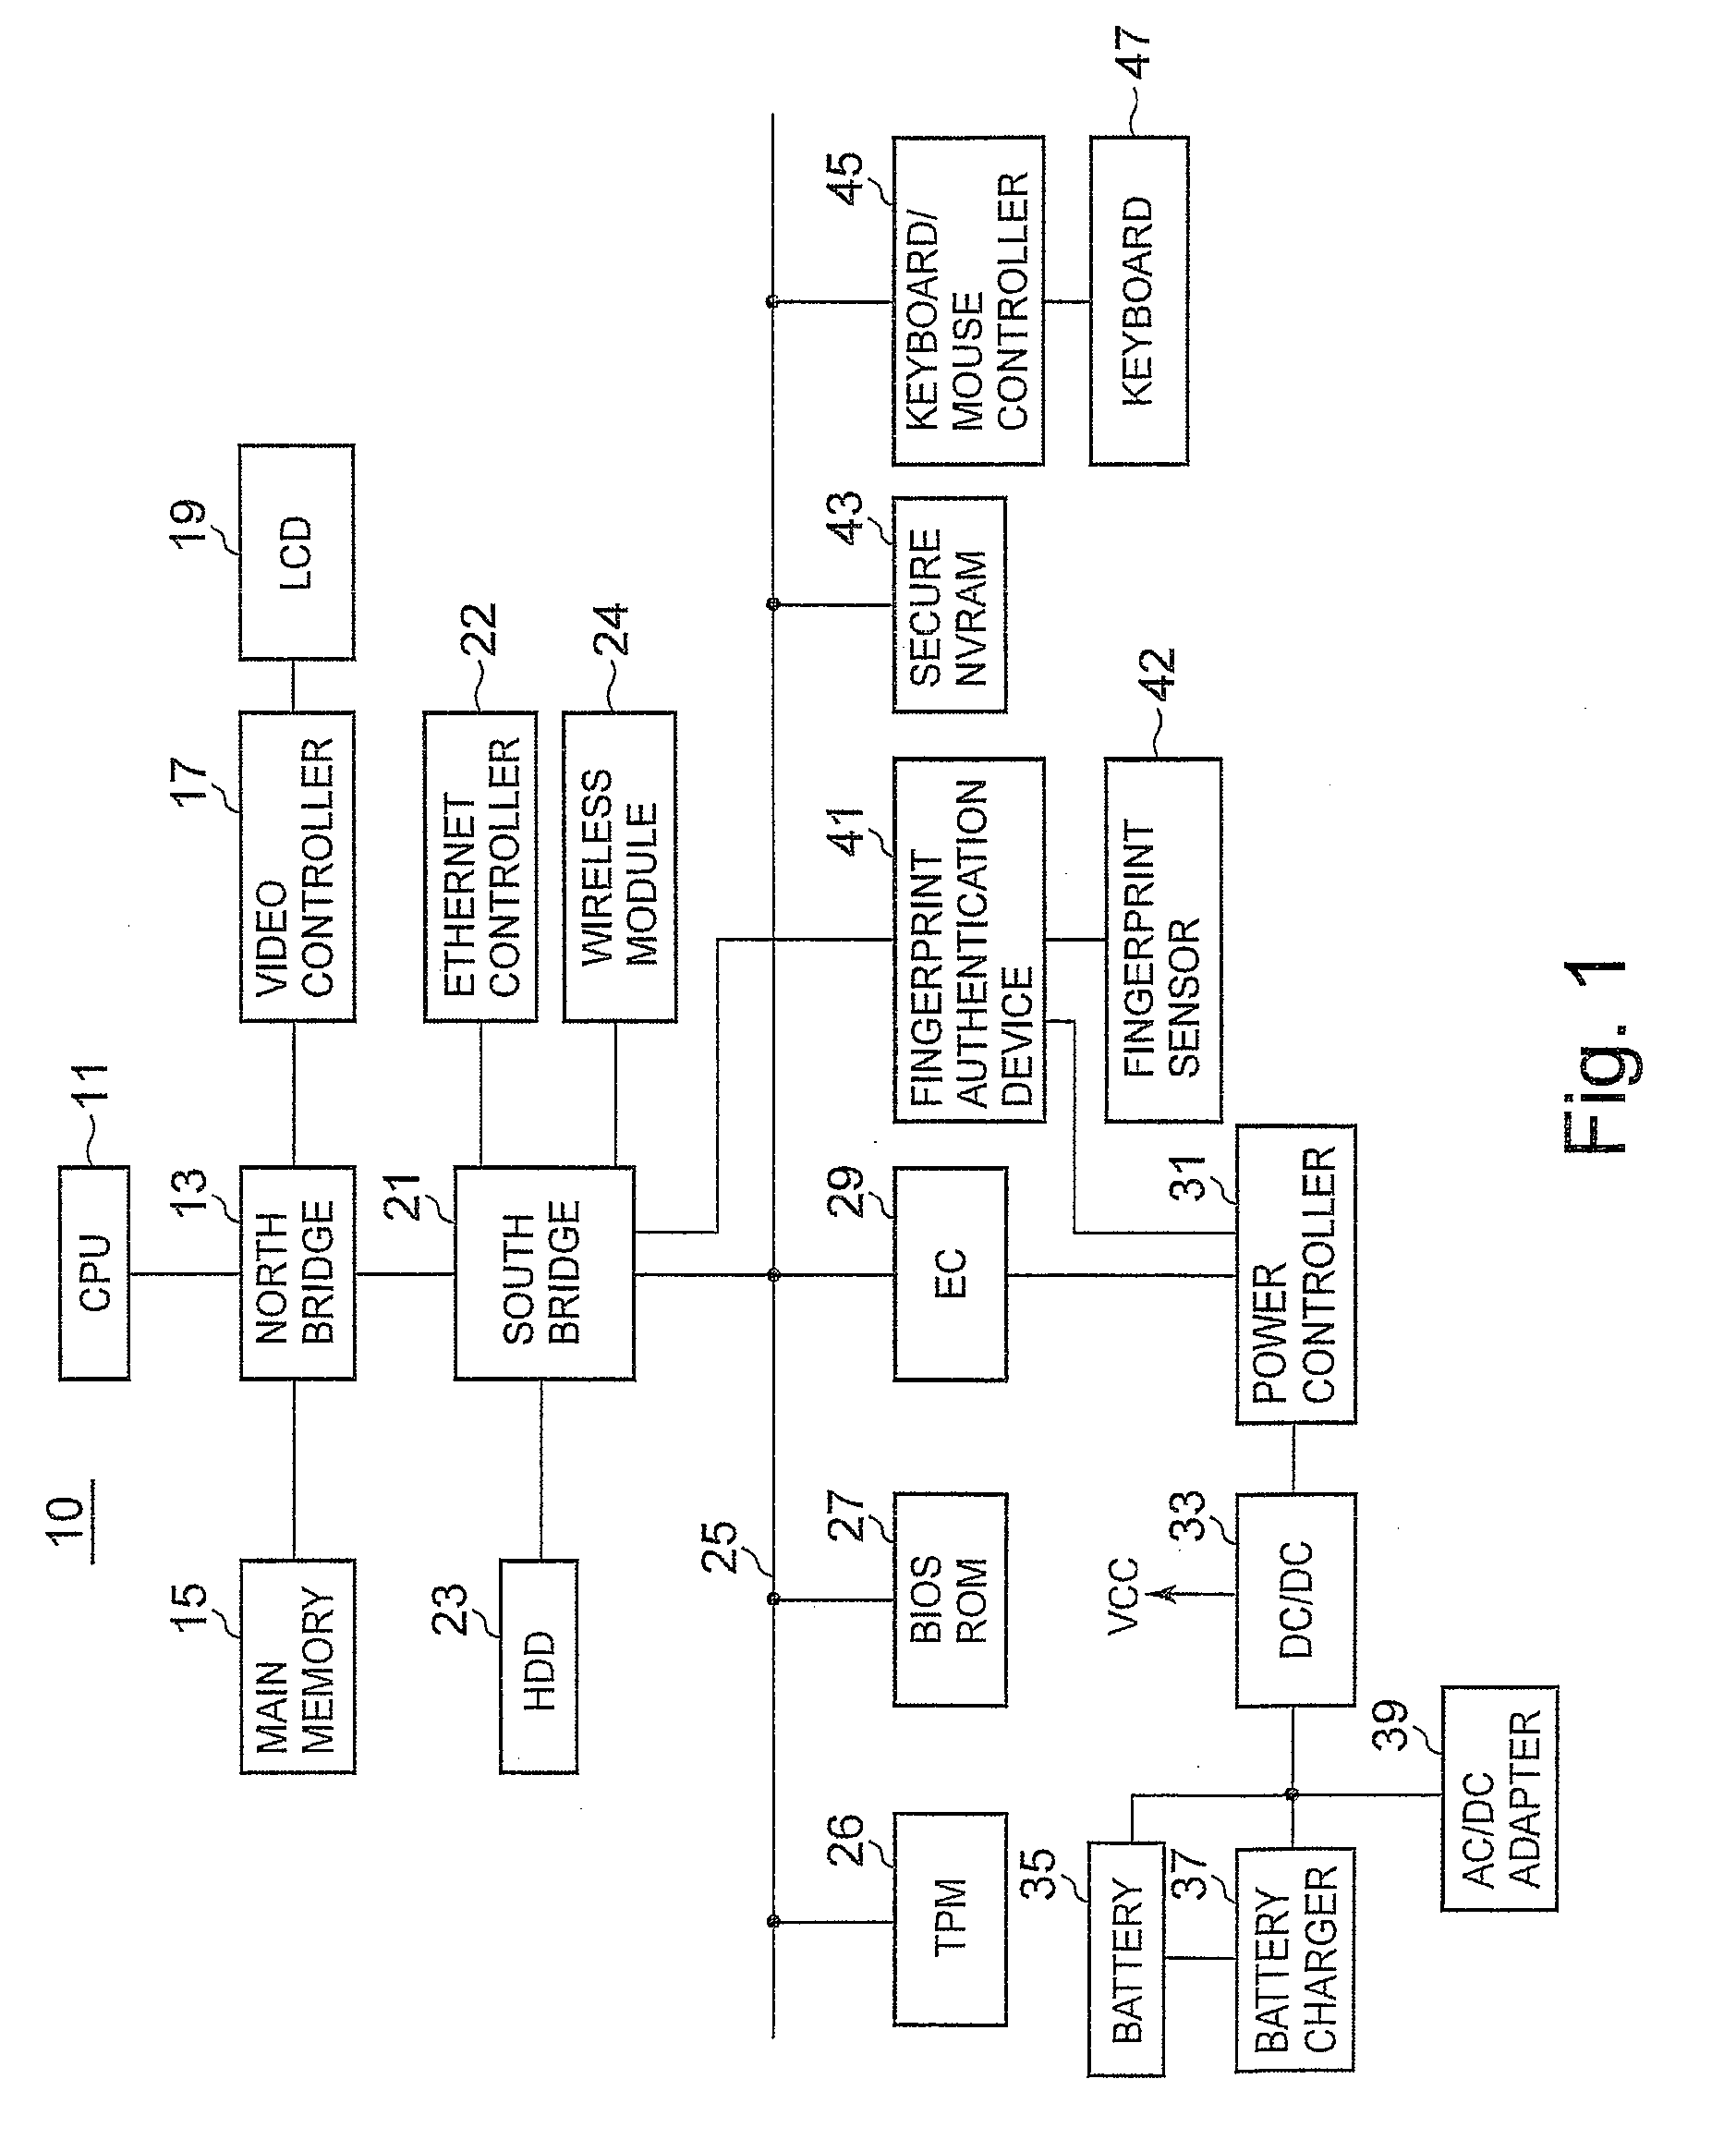 Computers Having a Biometric Authentication Device